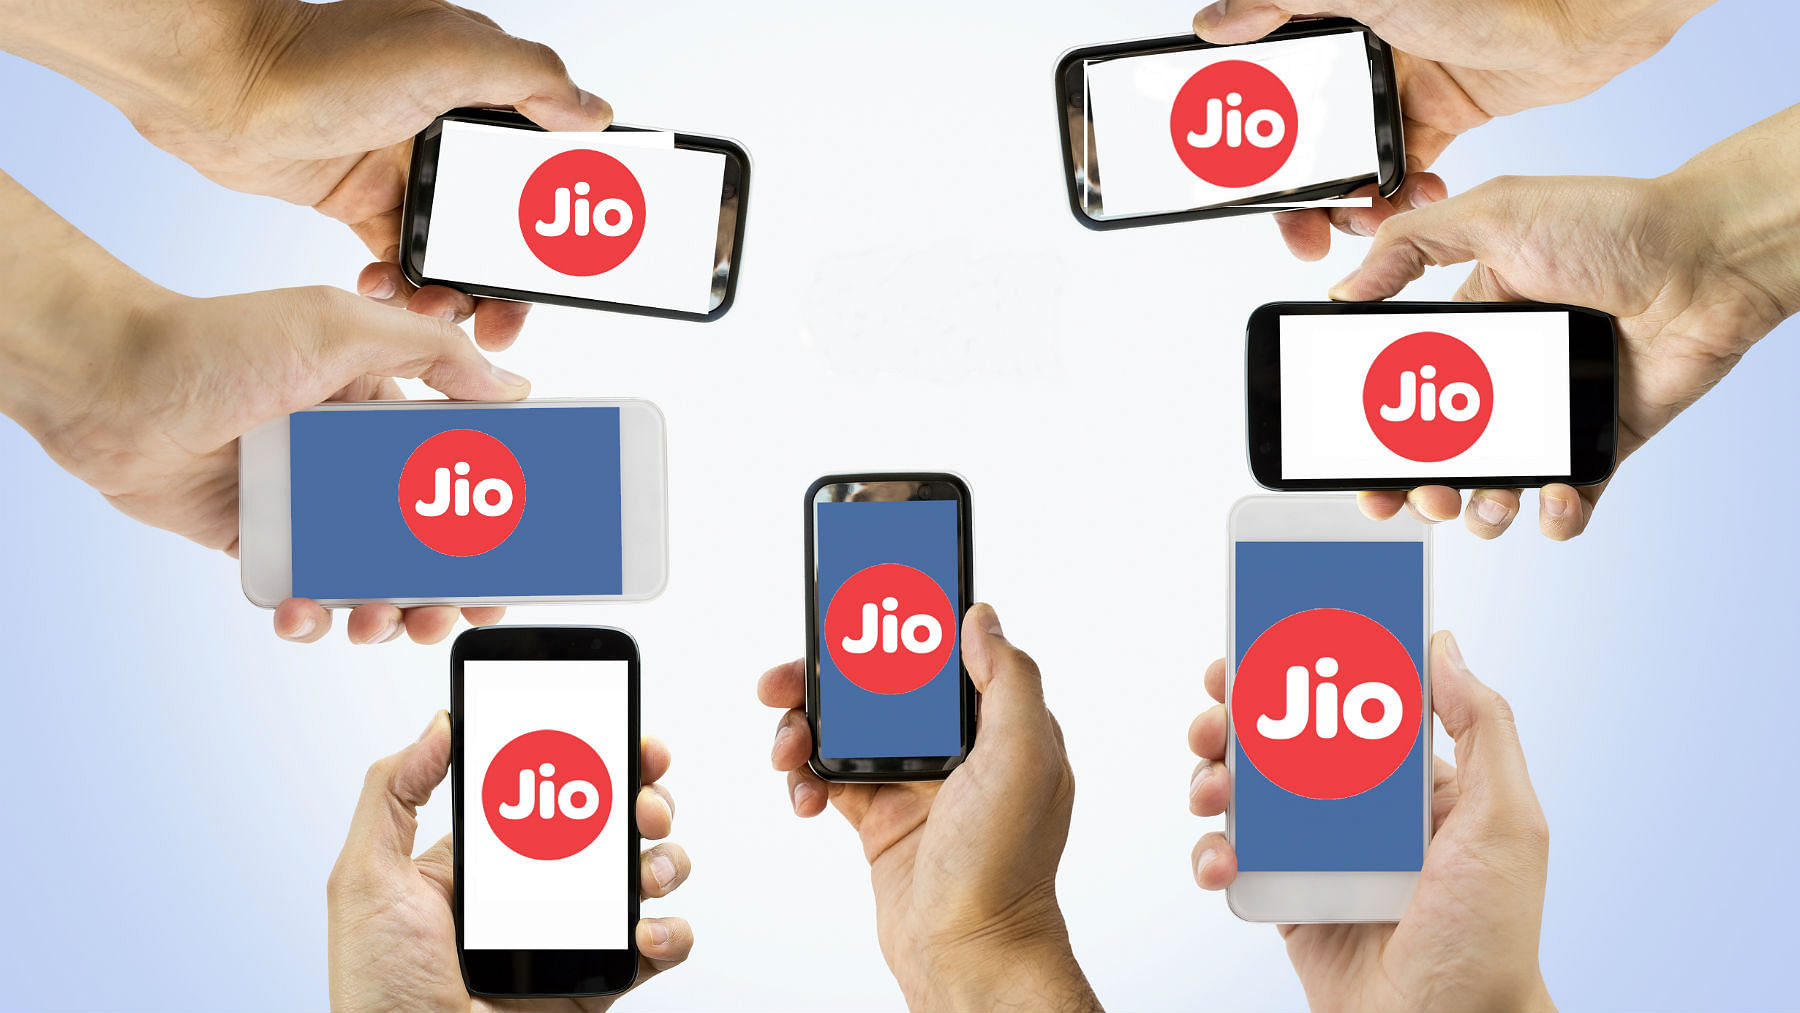 Reliance Jio is all set to cross the 100 million mark with customers soon. (Photo: <b>The Quint</b>)